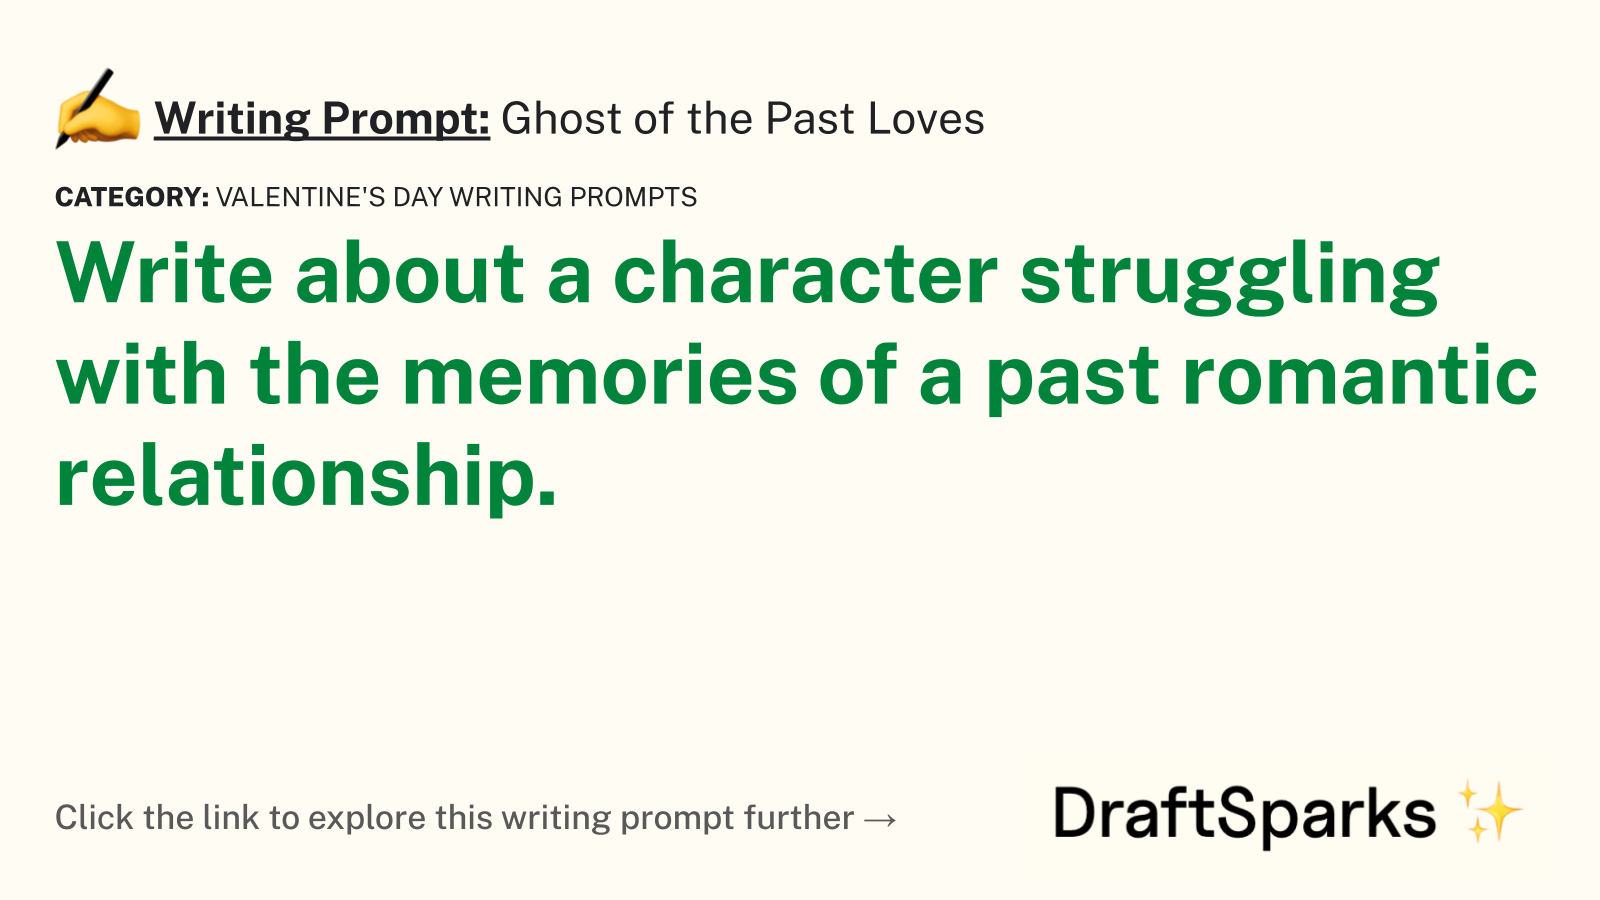 Ghost of the Past Loves